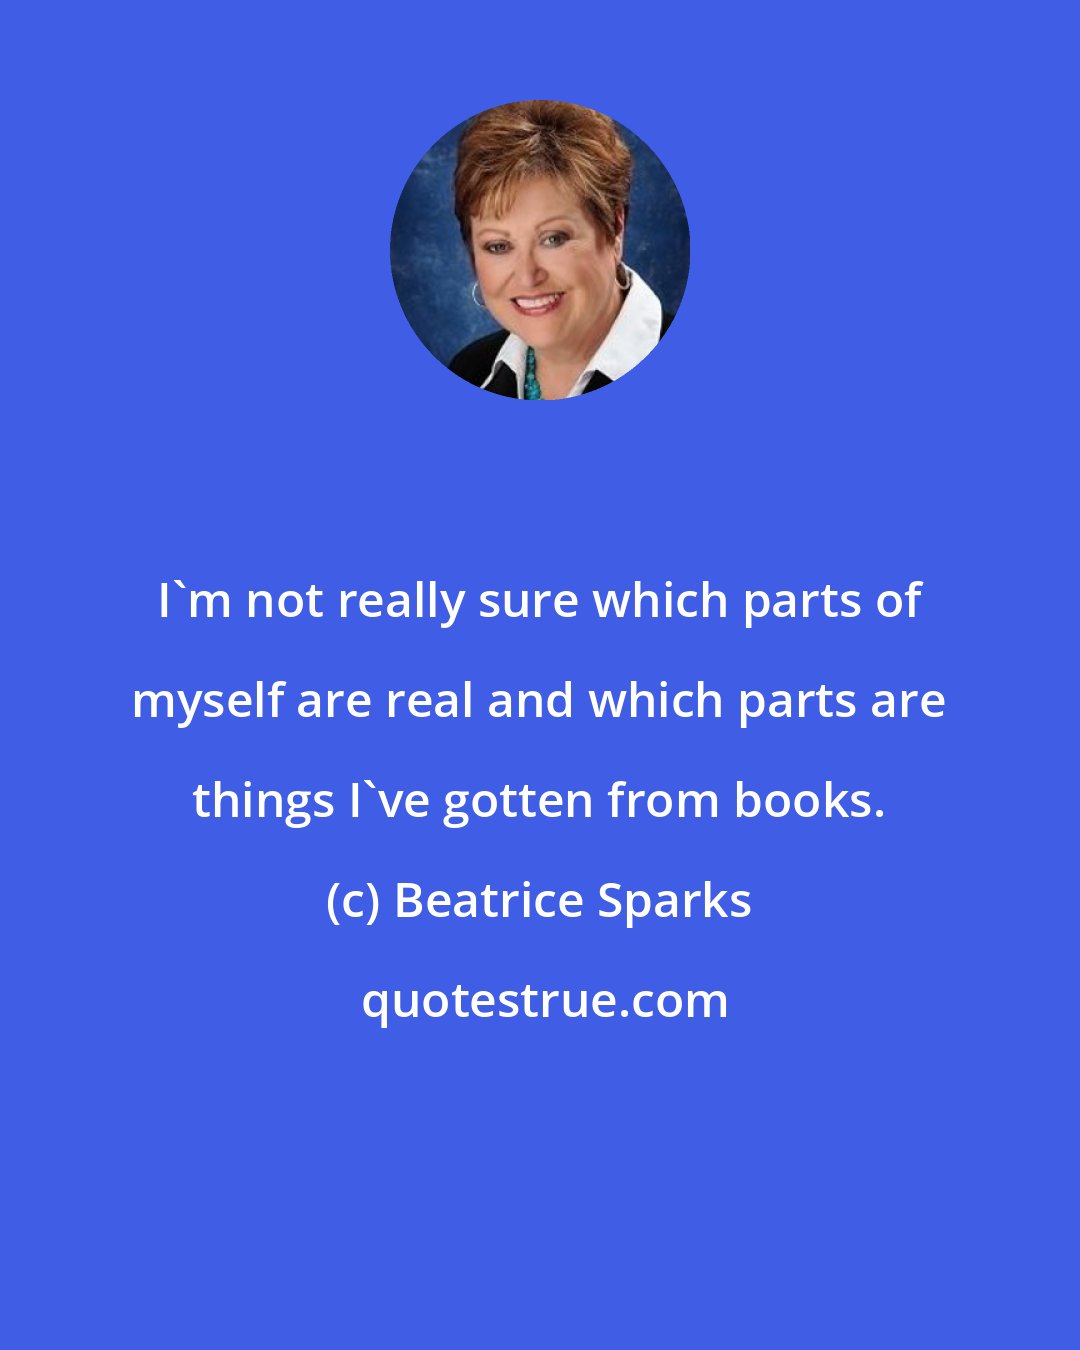 Beatrice Sparks: I'm not really sure which parts of myself are real and which parts are things I've gotten from books.